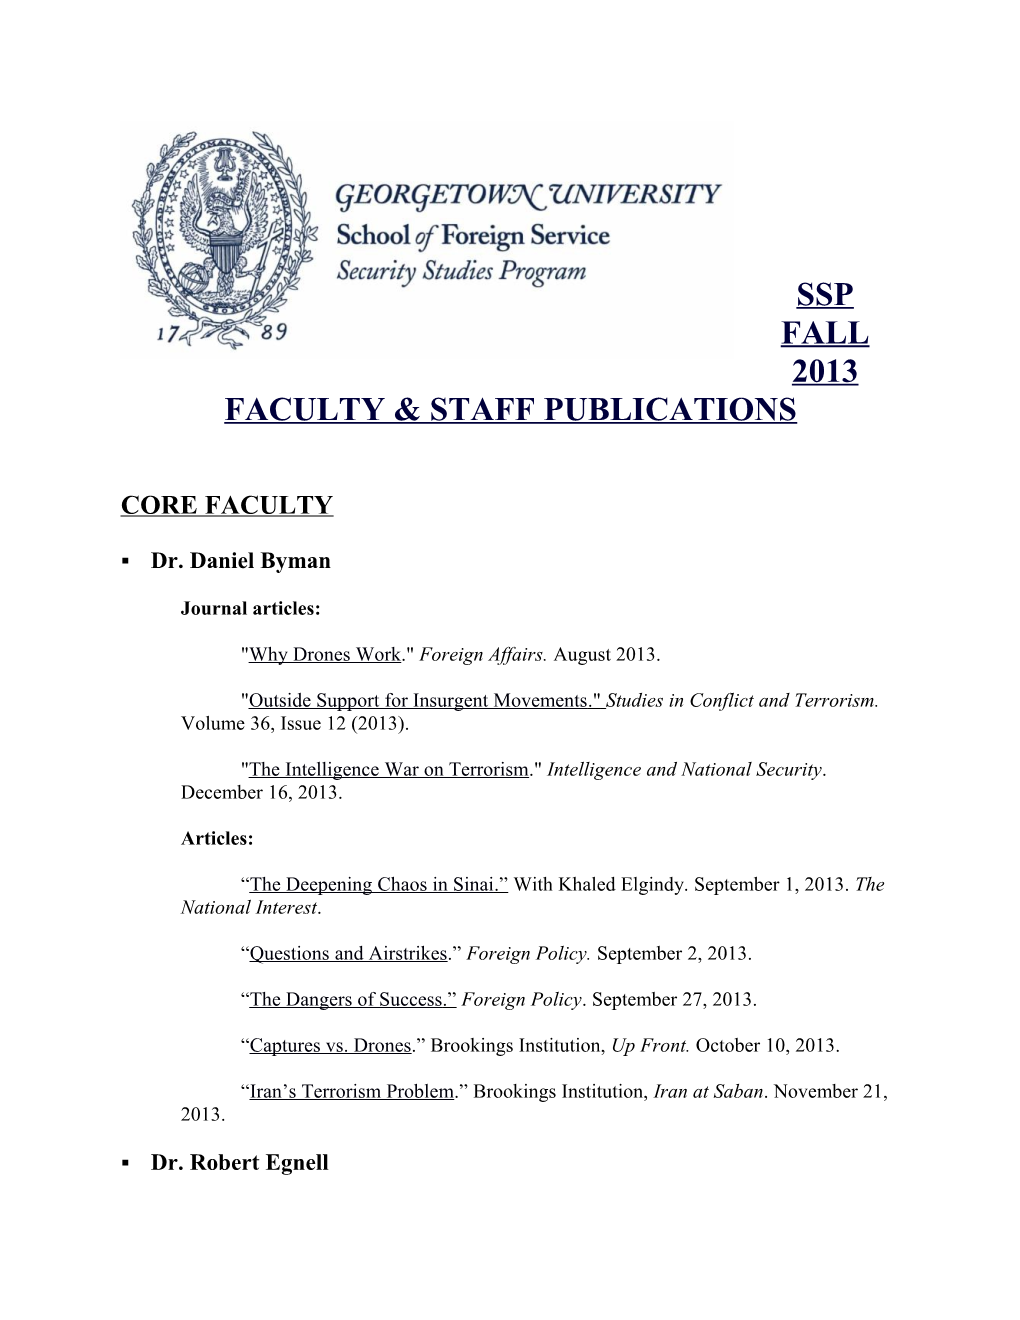 Ssp Fall 2013 Faculty & Staff Publications